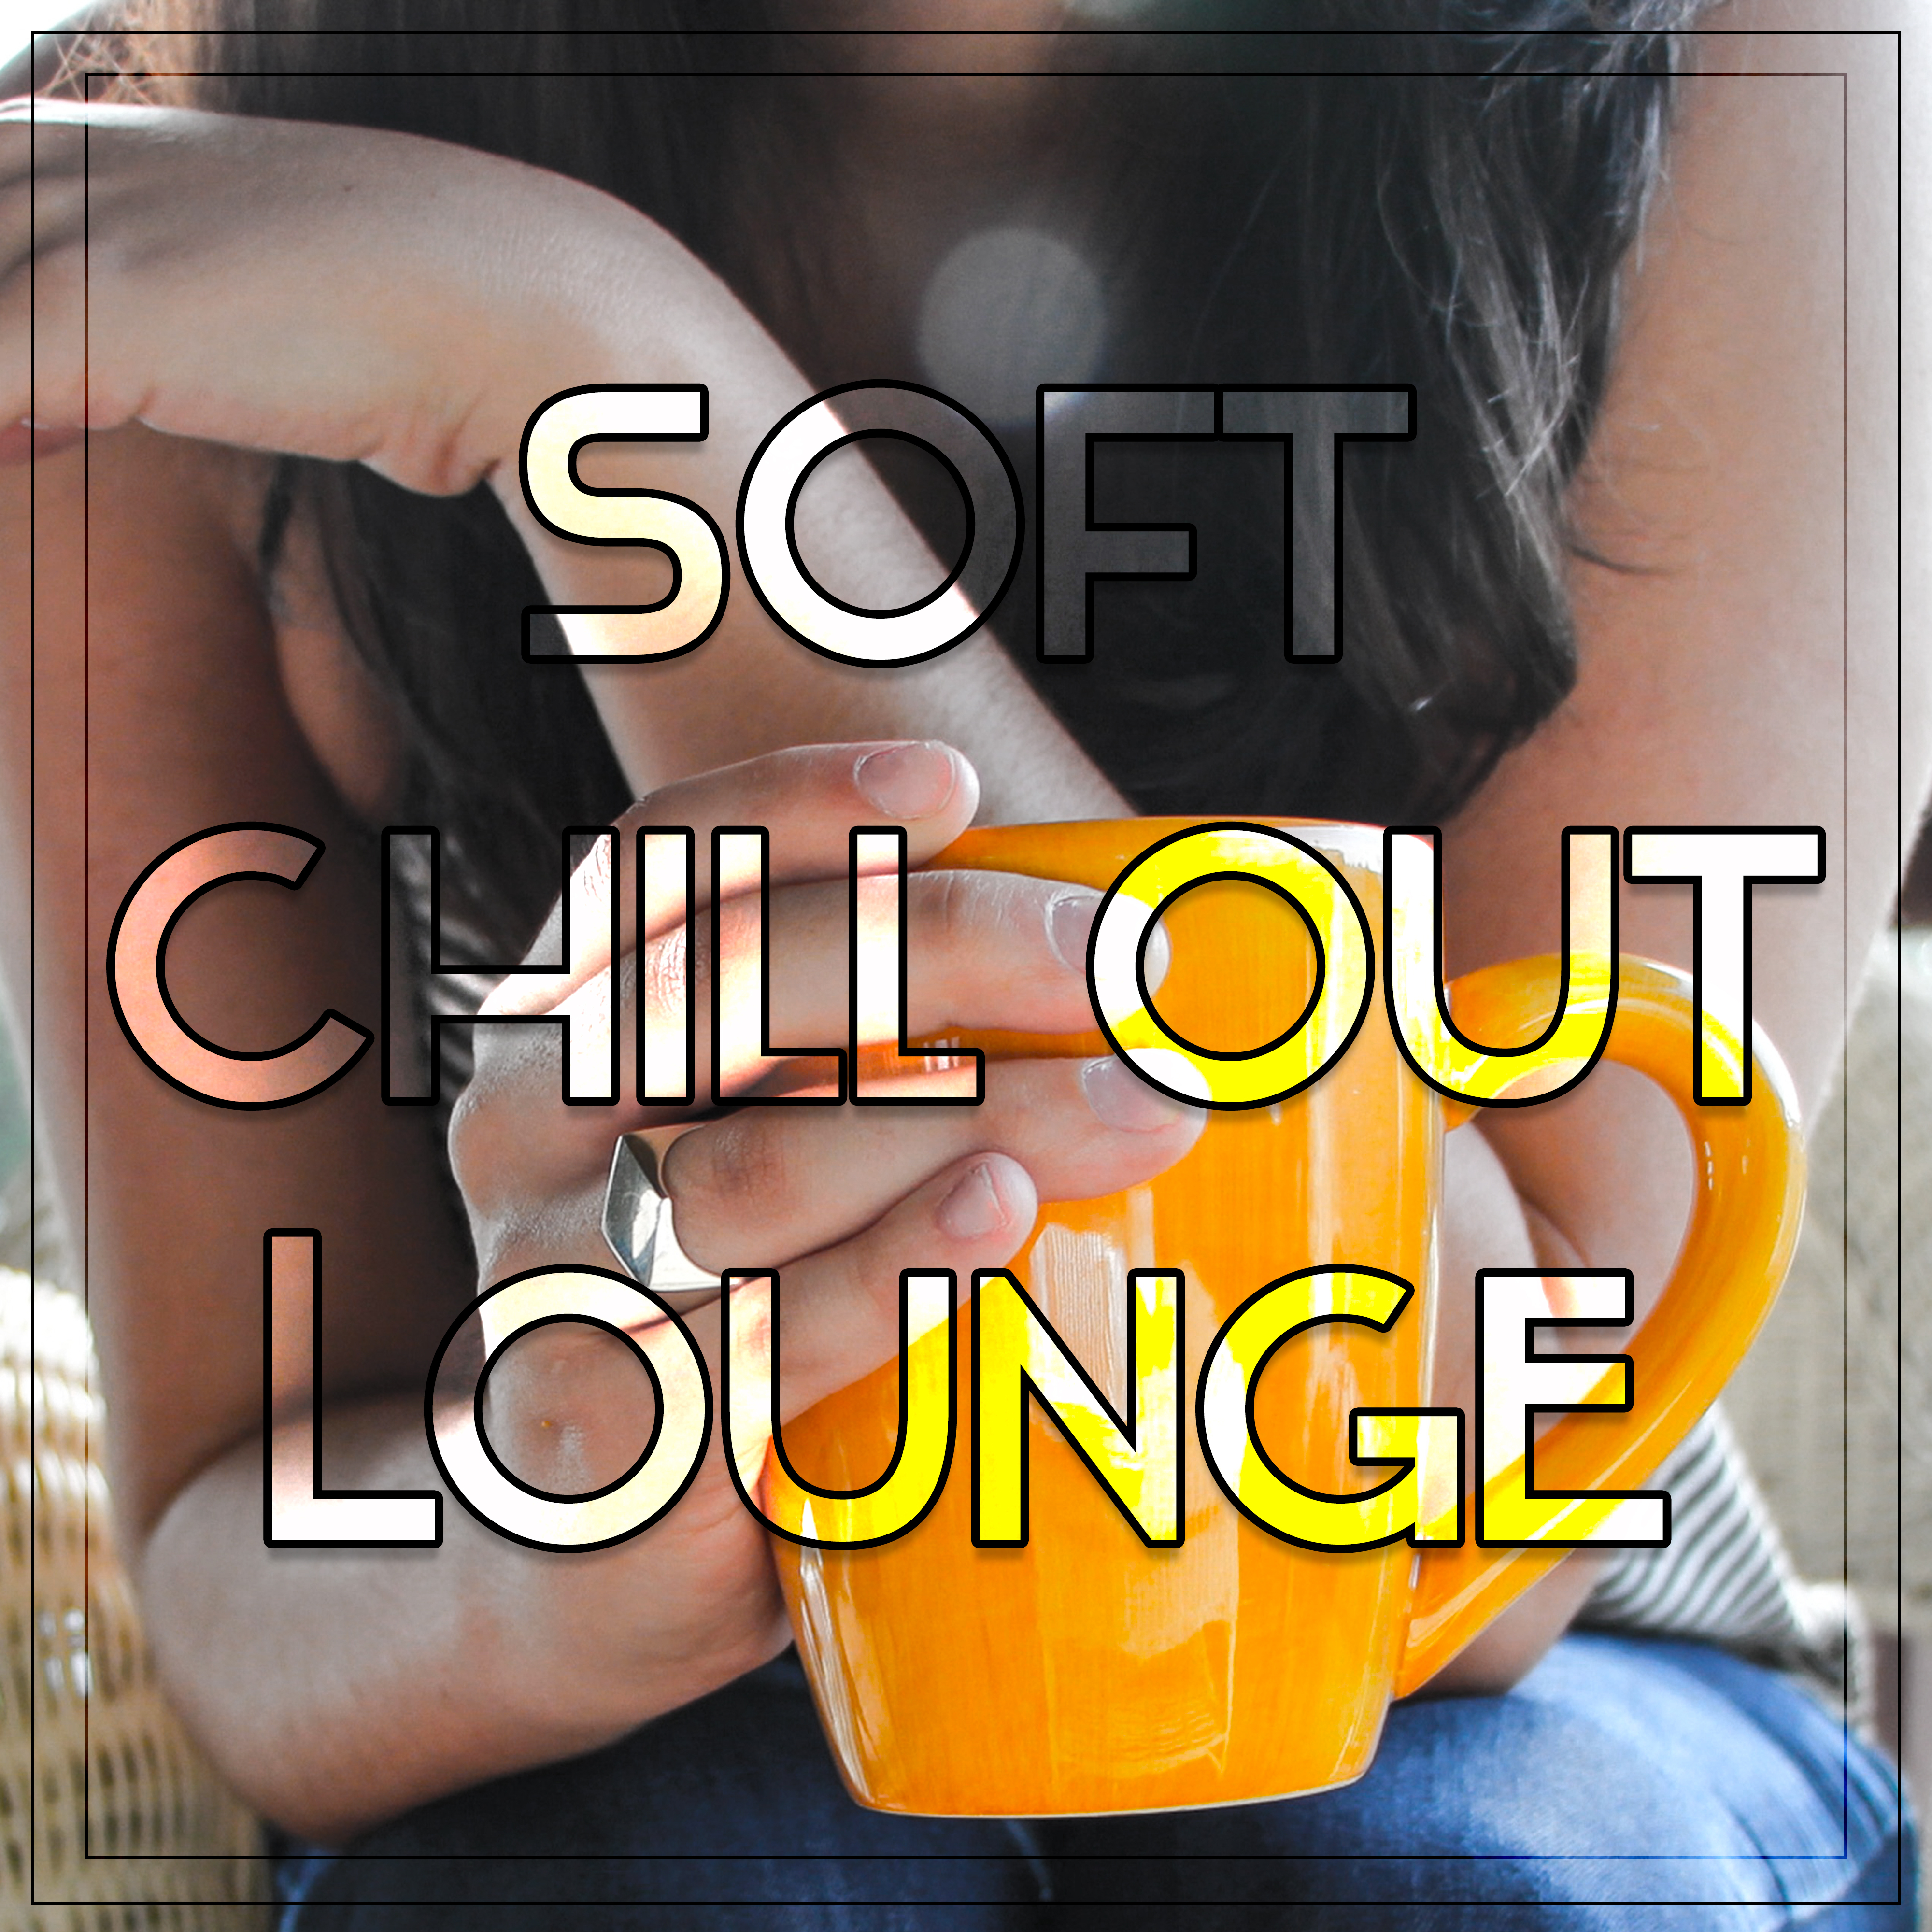 Soft Chill Out Lounge  Relaxing Music, Stress Relief, Summertime Rest, Holiday Music